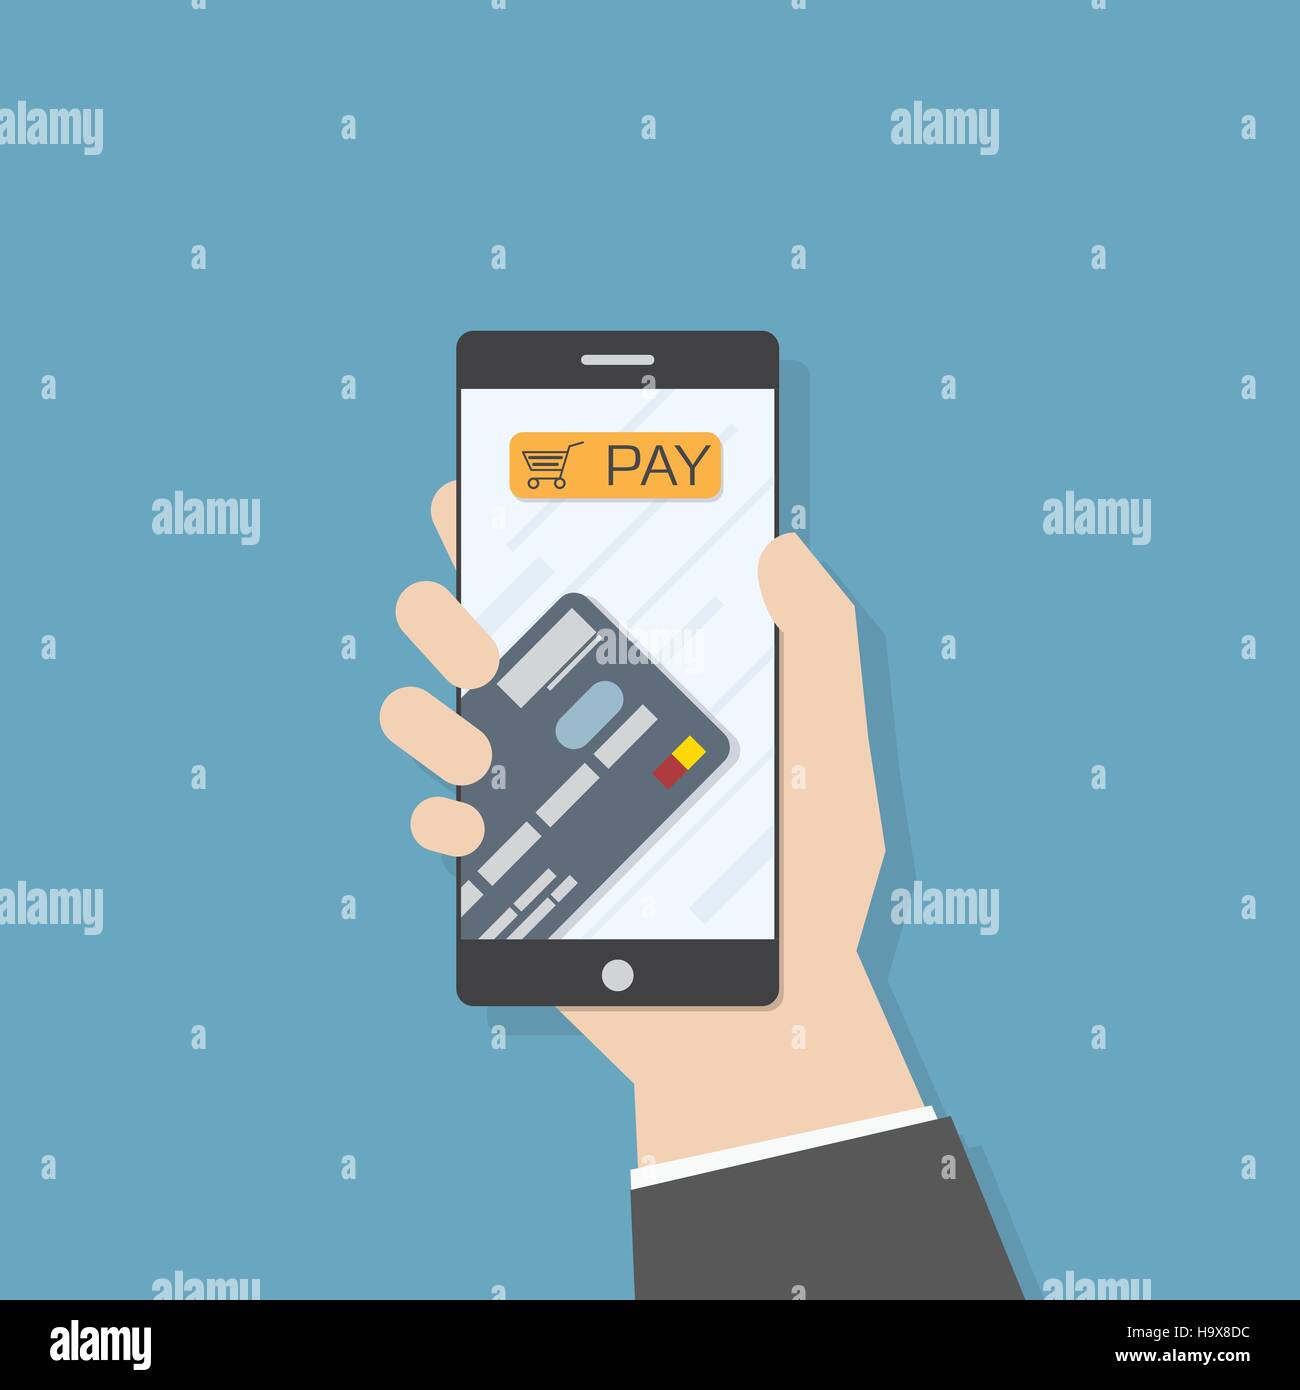 Simple flat illustration. Hand holding smartphone with credit card and pay button. Phone application template. Stock Vector